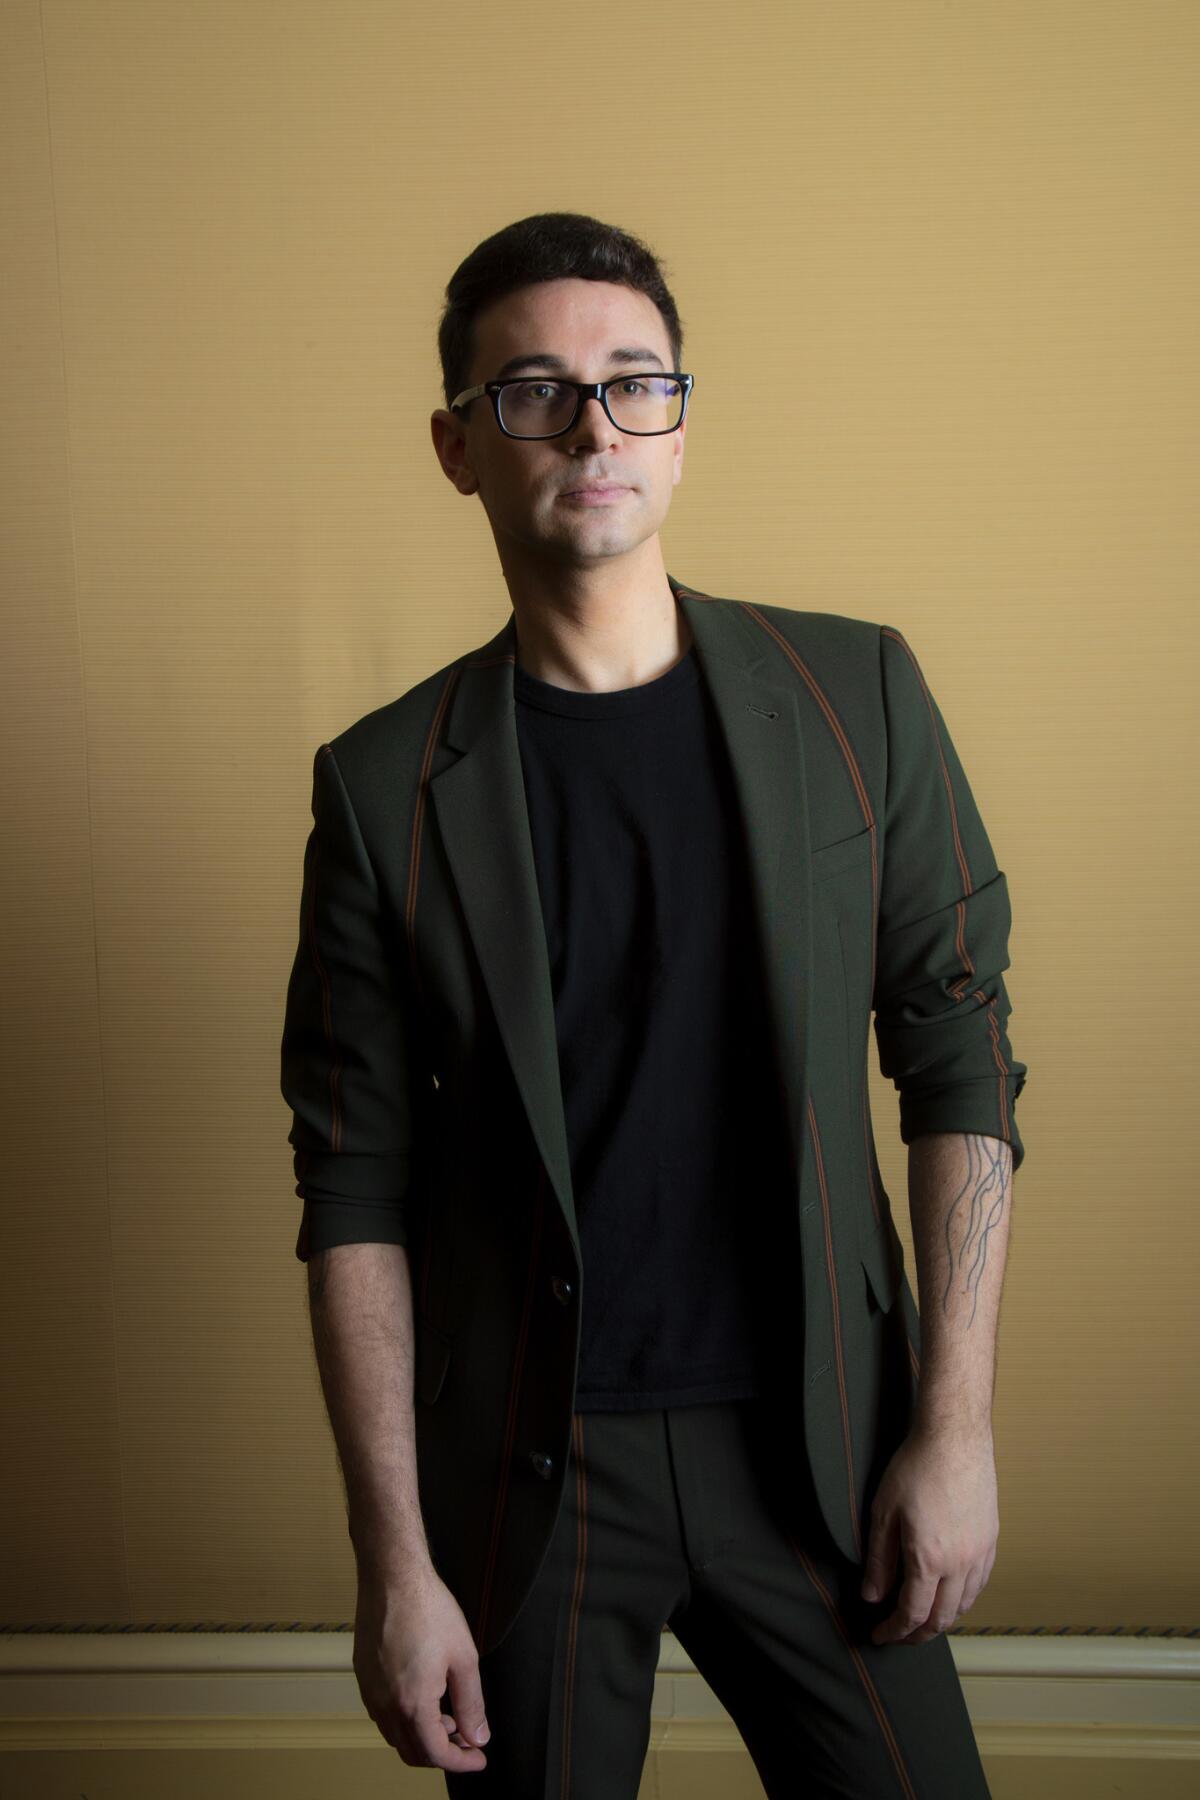 Fashion designer Christian Siriano is a sought-after designer to the stars and is returning to the new season of "Project Runway" as a mentor, the role long occupied by Tim Gunn.